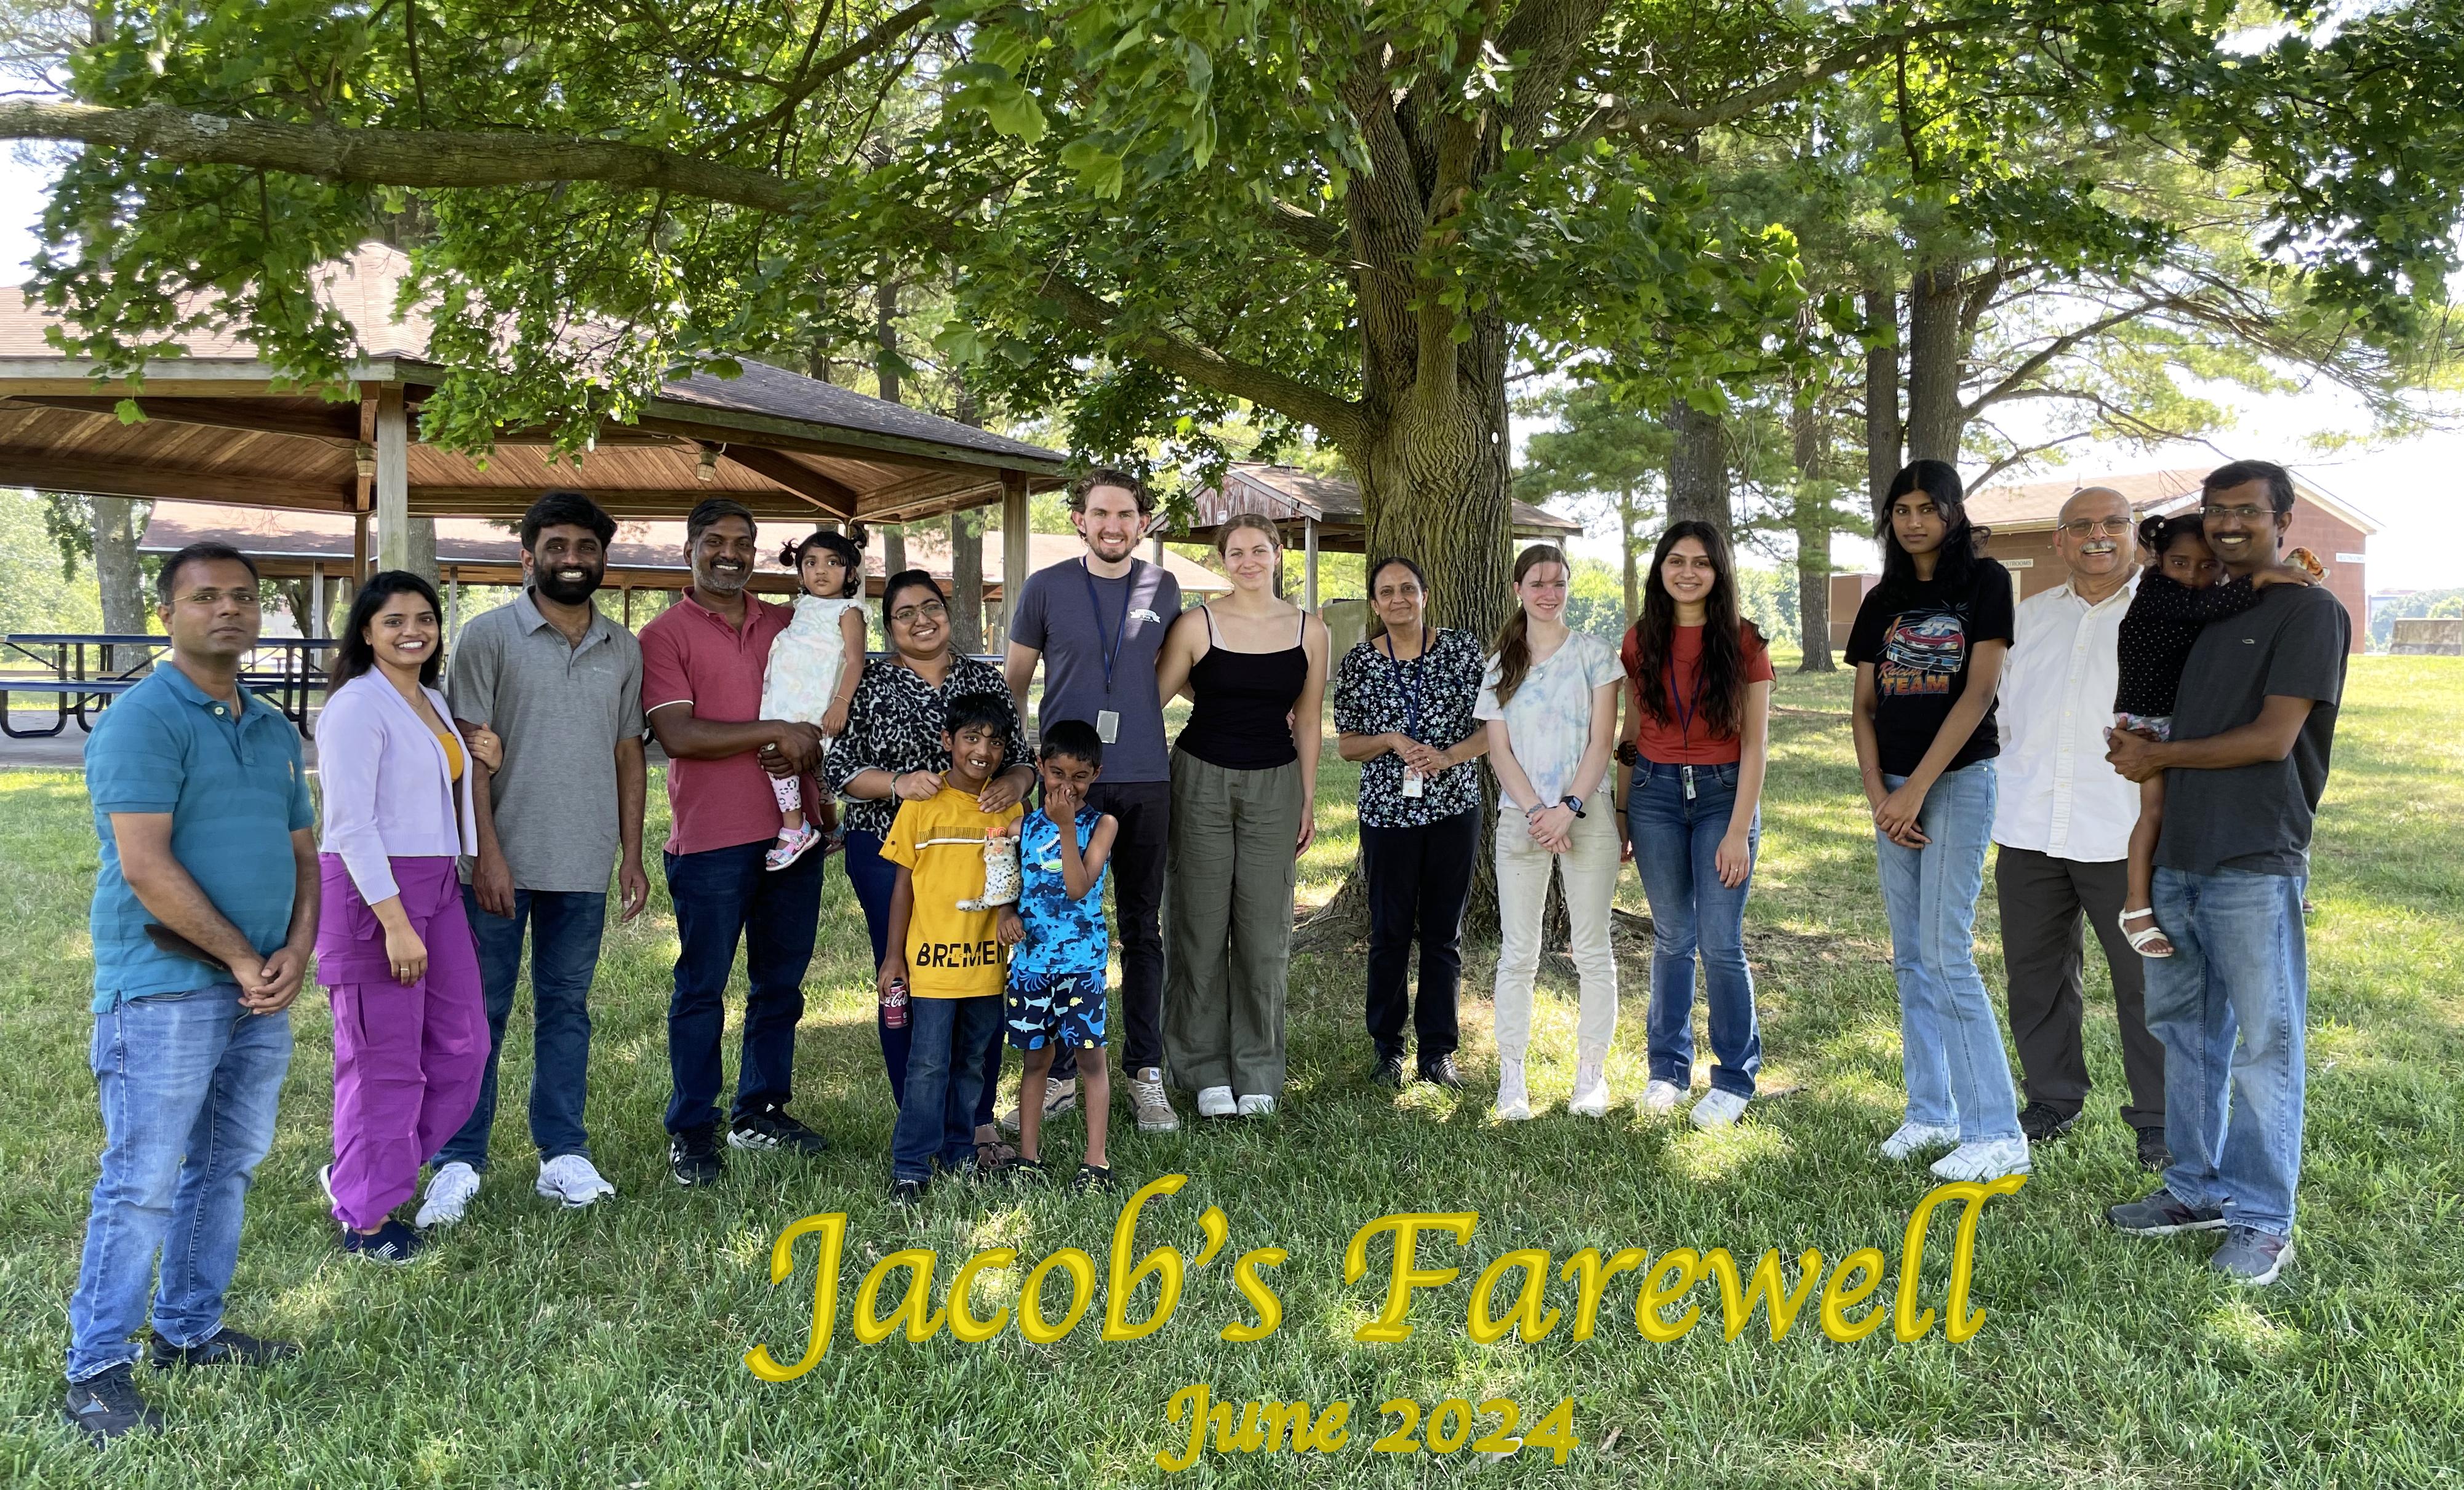 Jacob's farewell picture